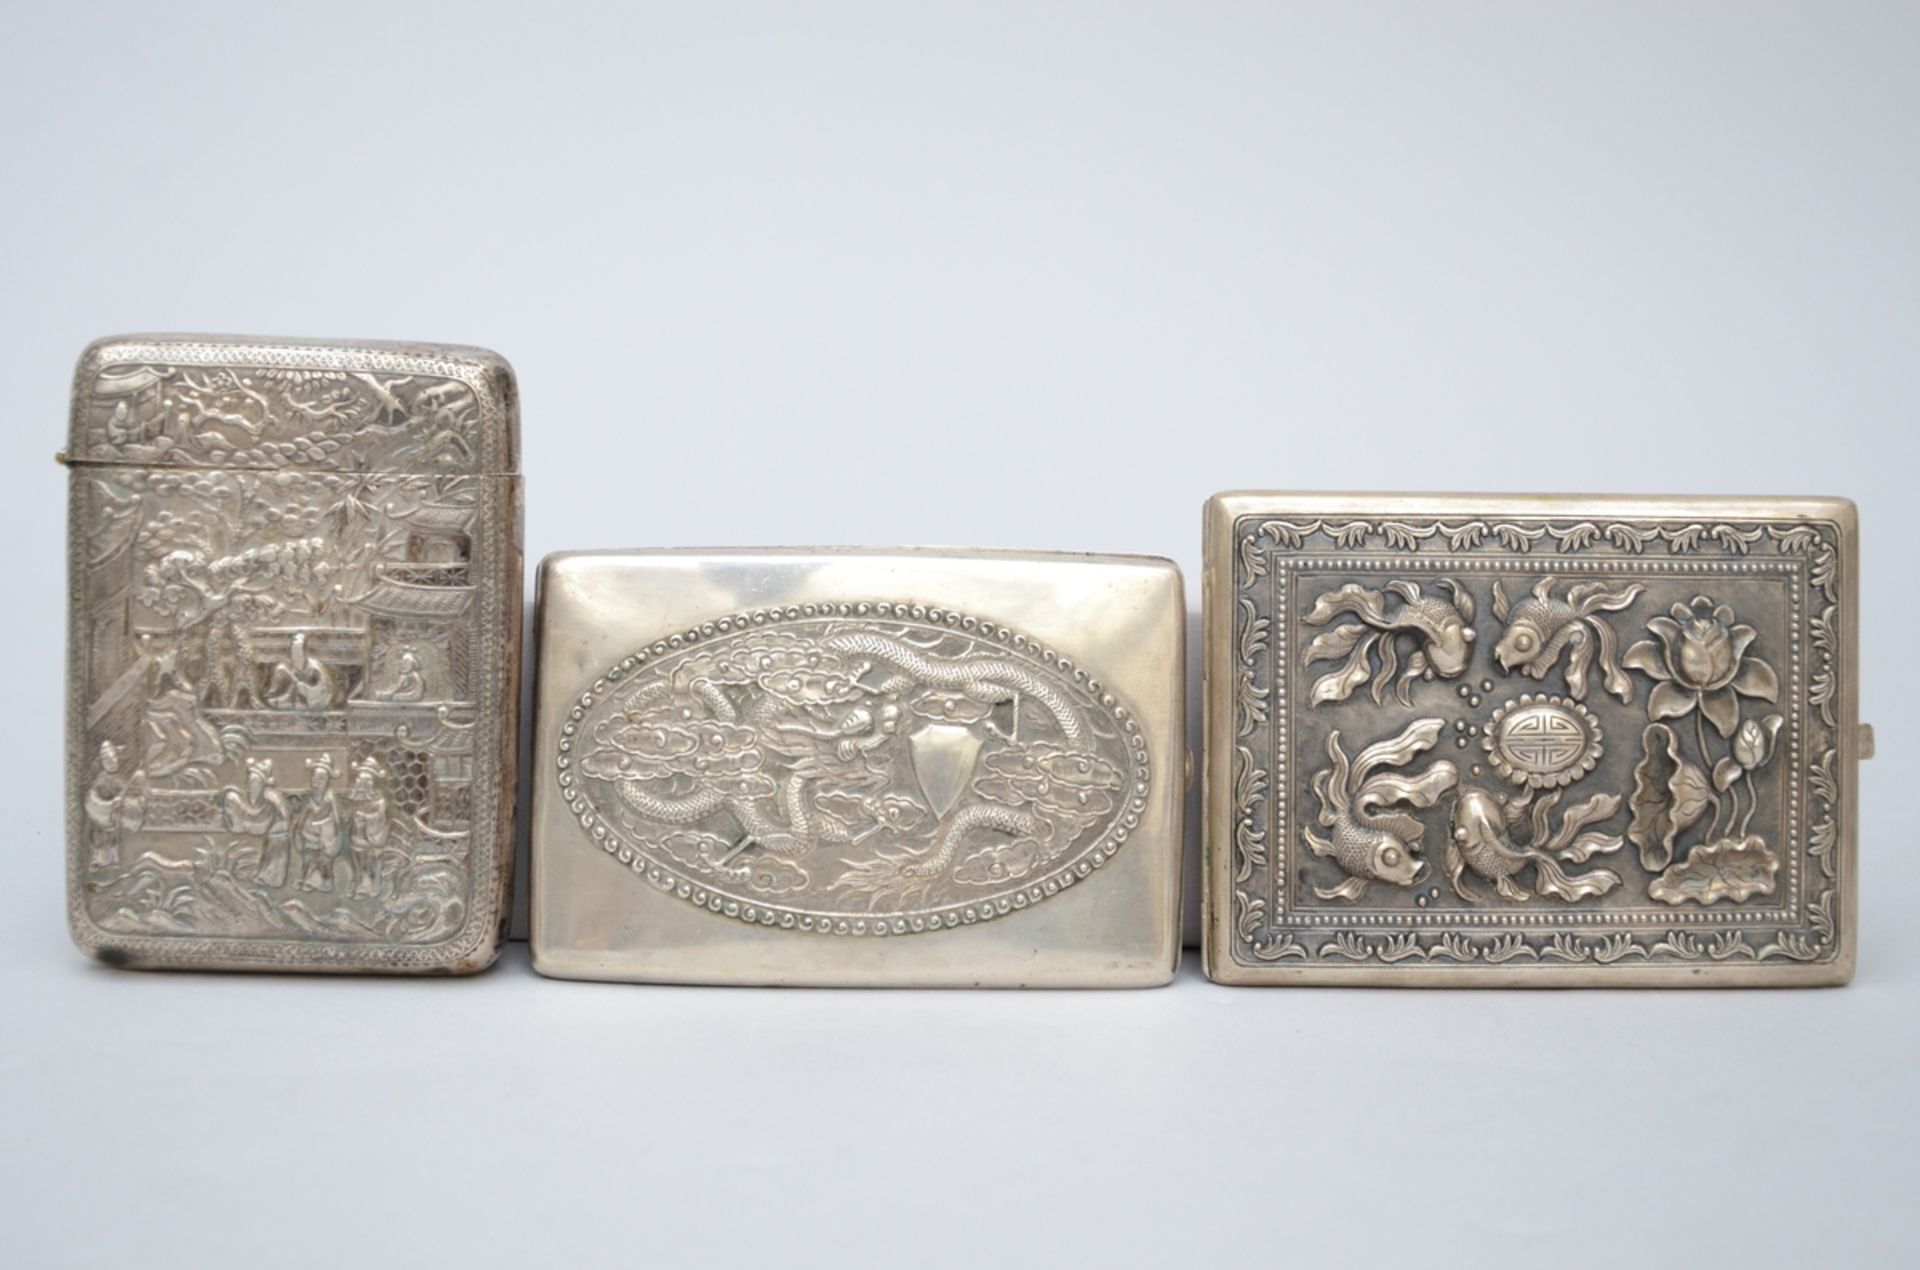 Lot: 3 Chinese silver cigarette cases (11x8 12x8 12x9 cm) (*)